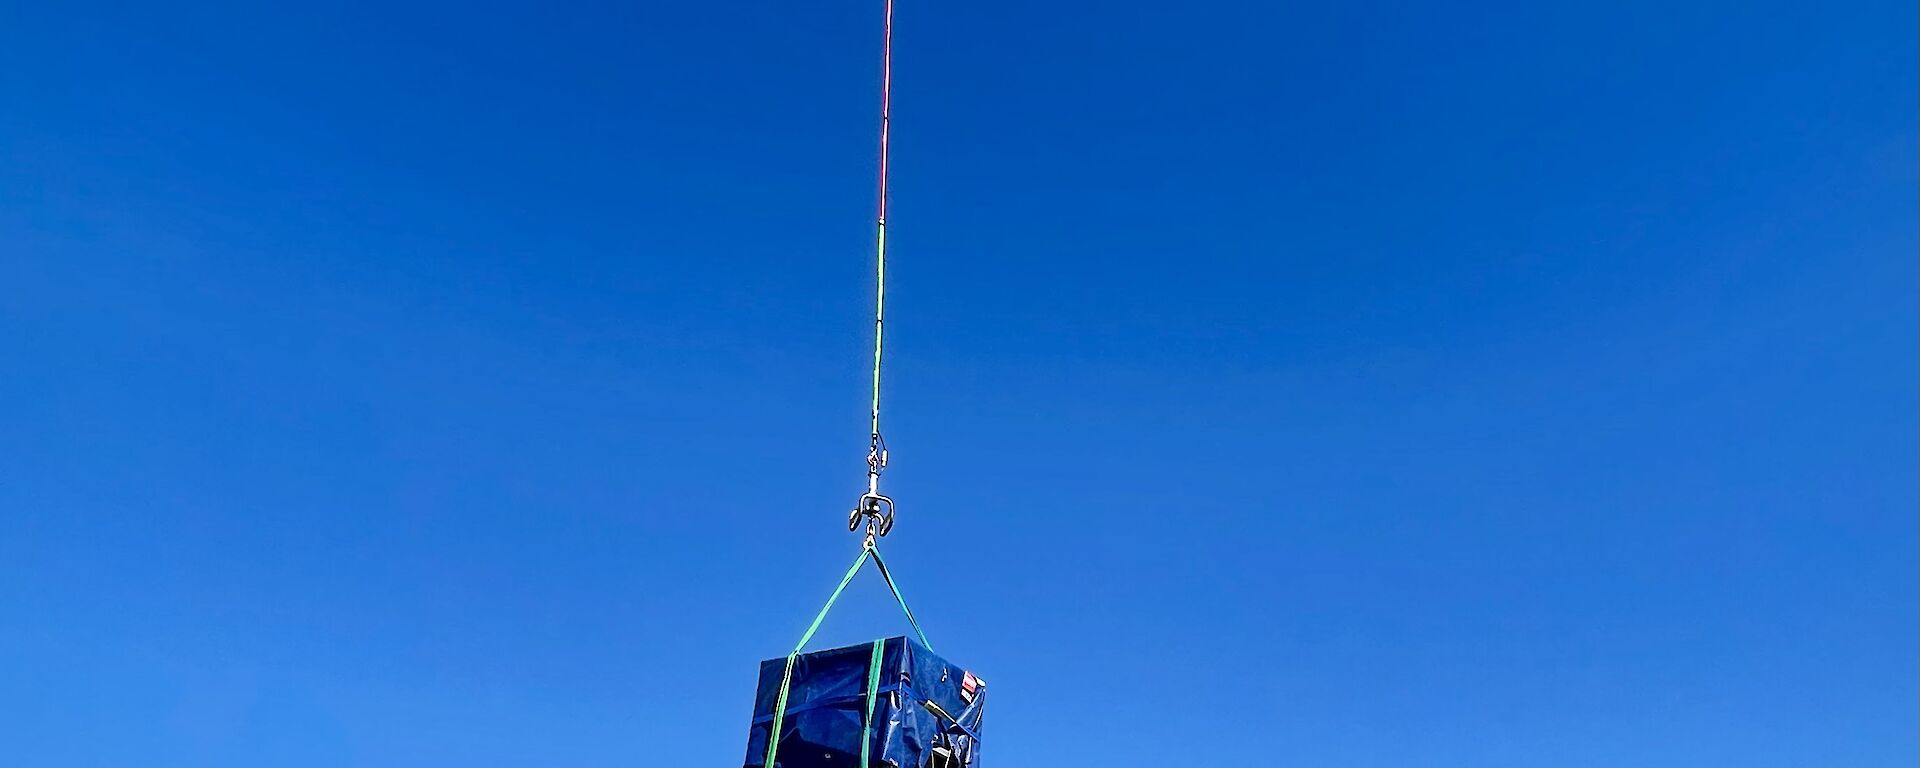 A helicopter carrying a blue cage on a long rope